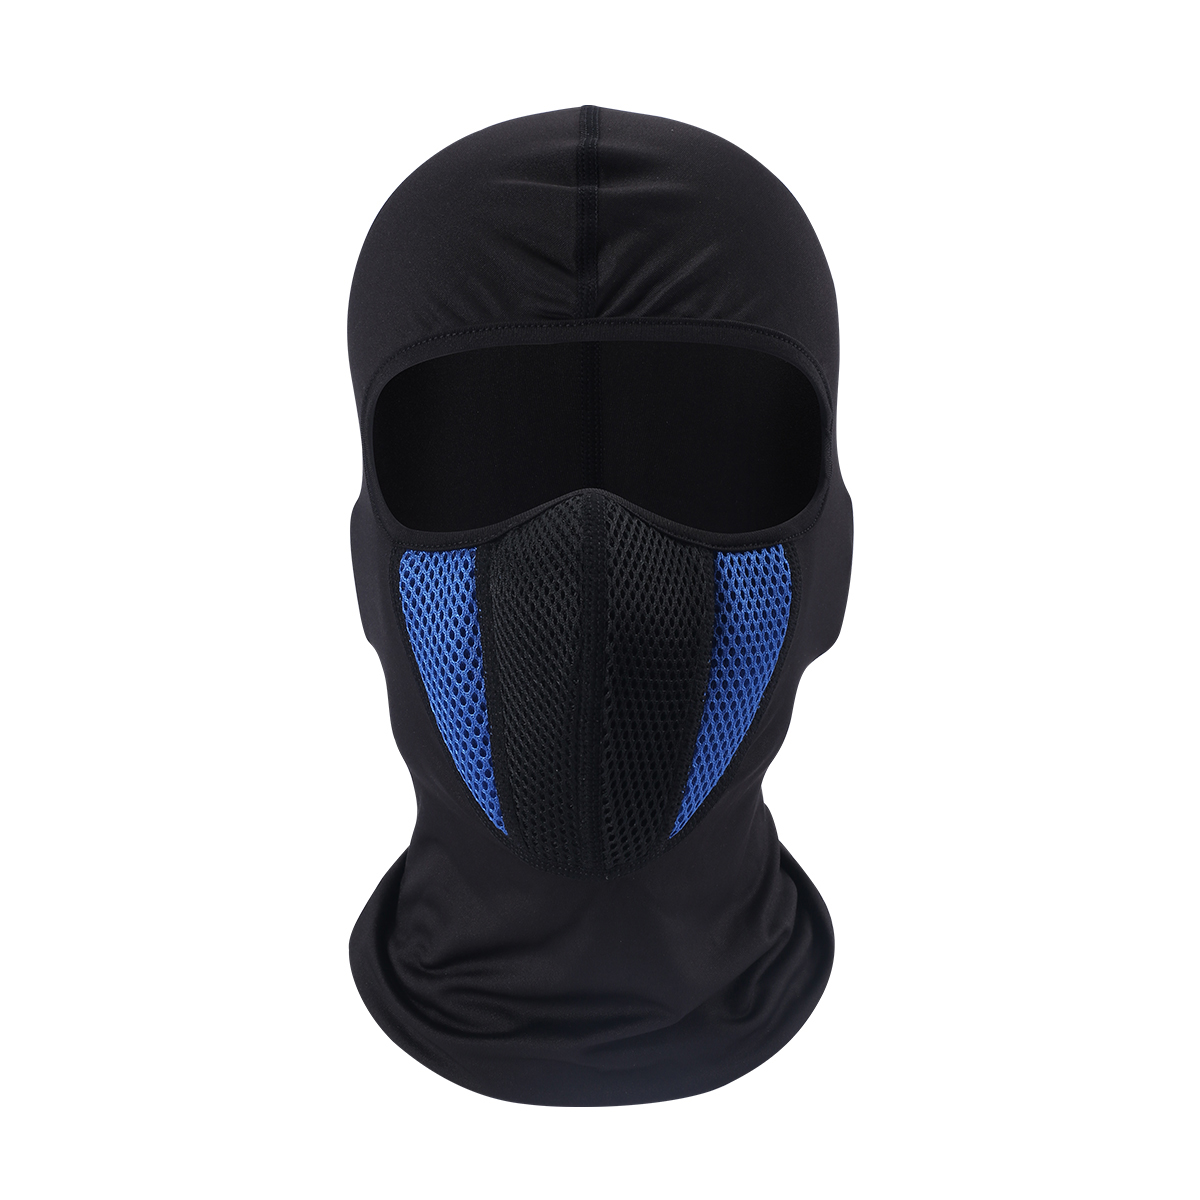 Moto Face Mask Motorcycle Face Shield Tactical Airsoft Paintball Cycling Bike Ski Army Helmet Full Face Mask